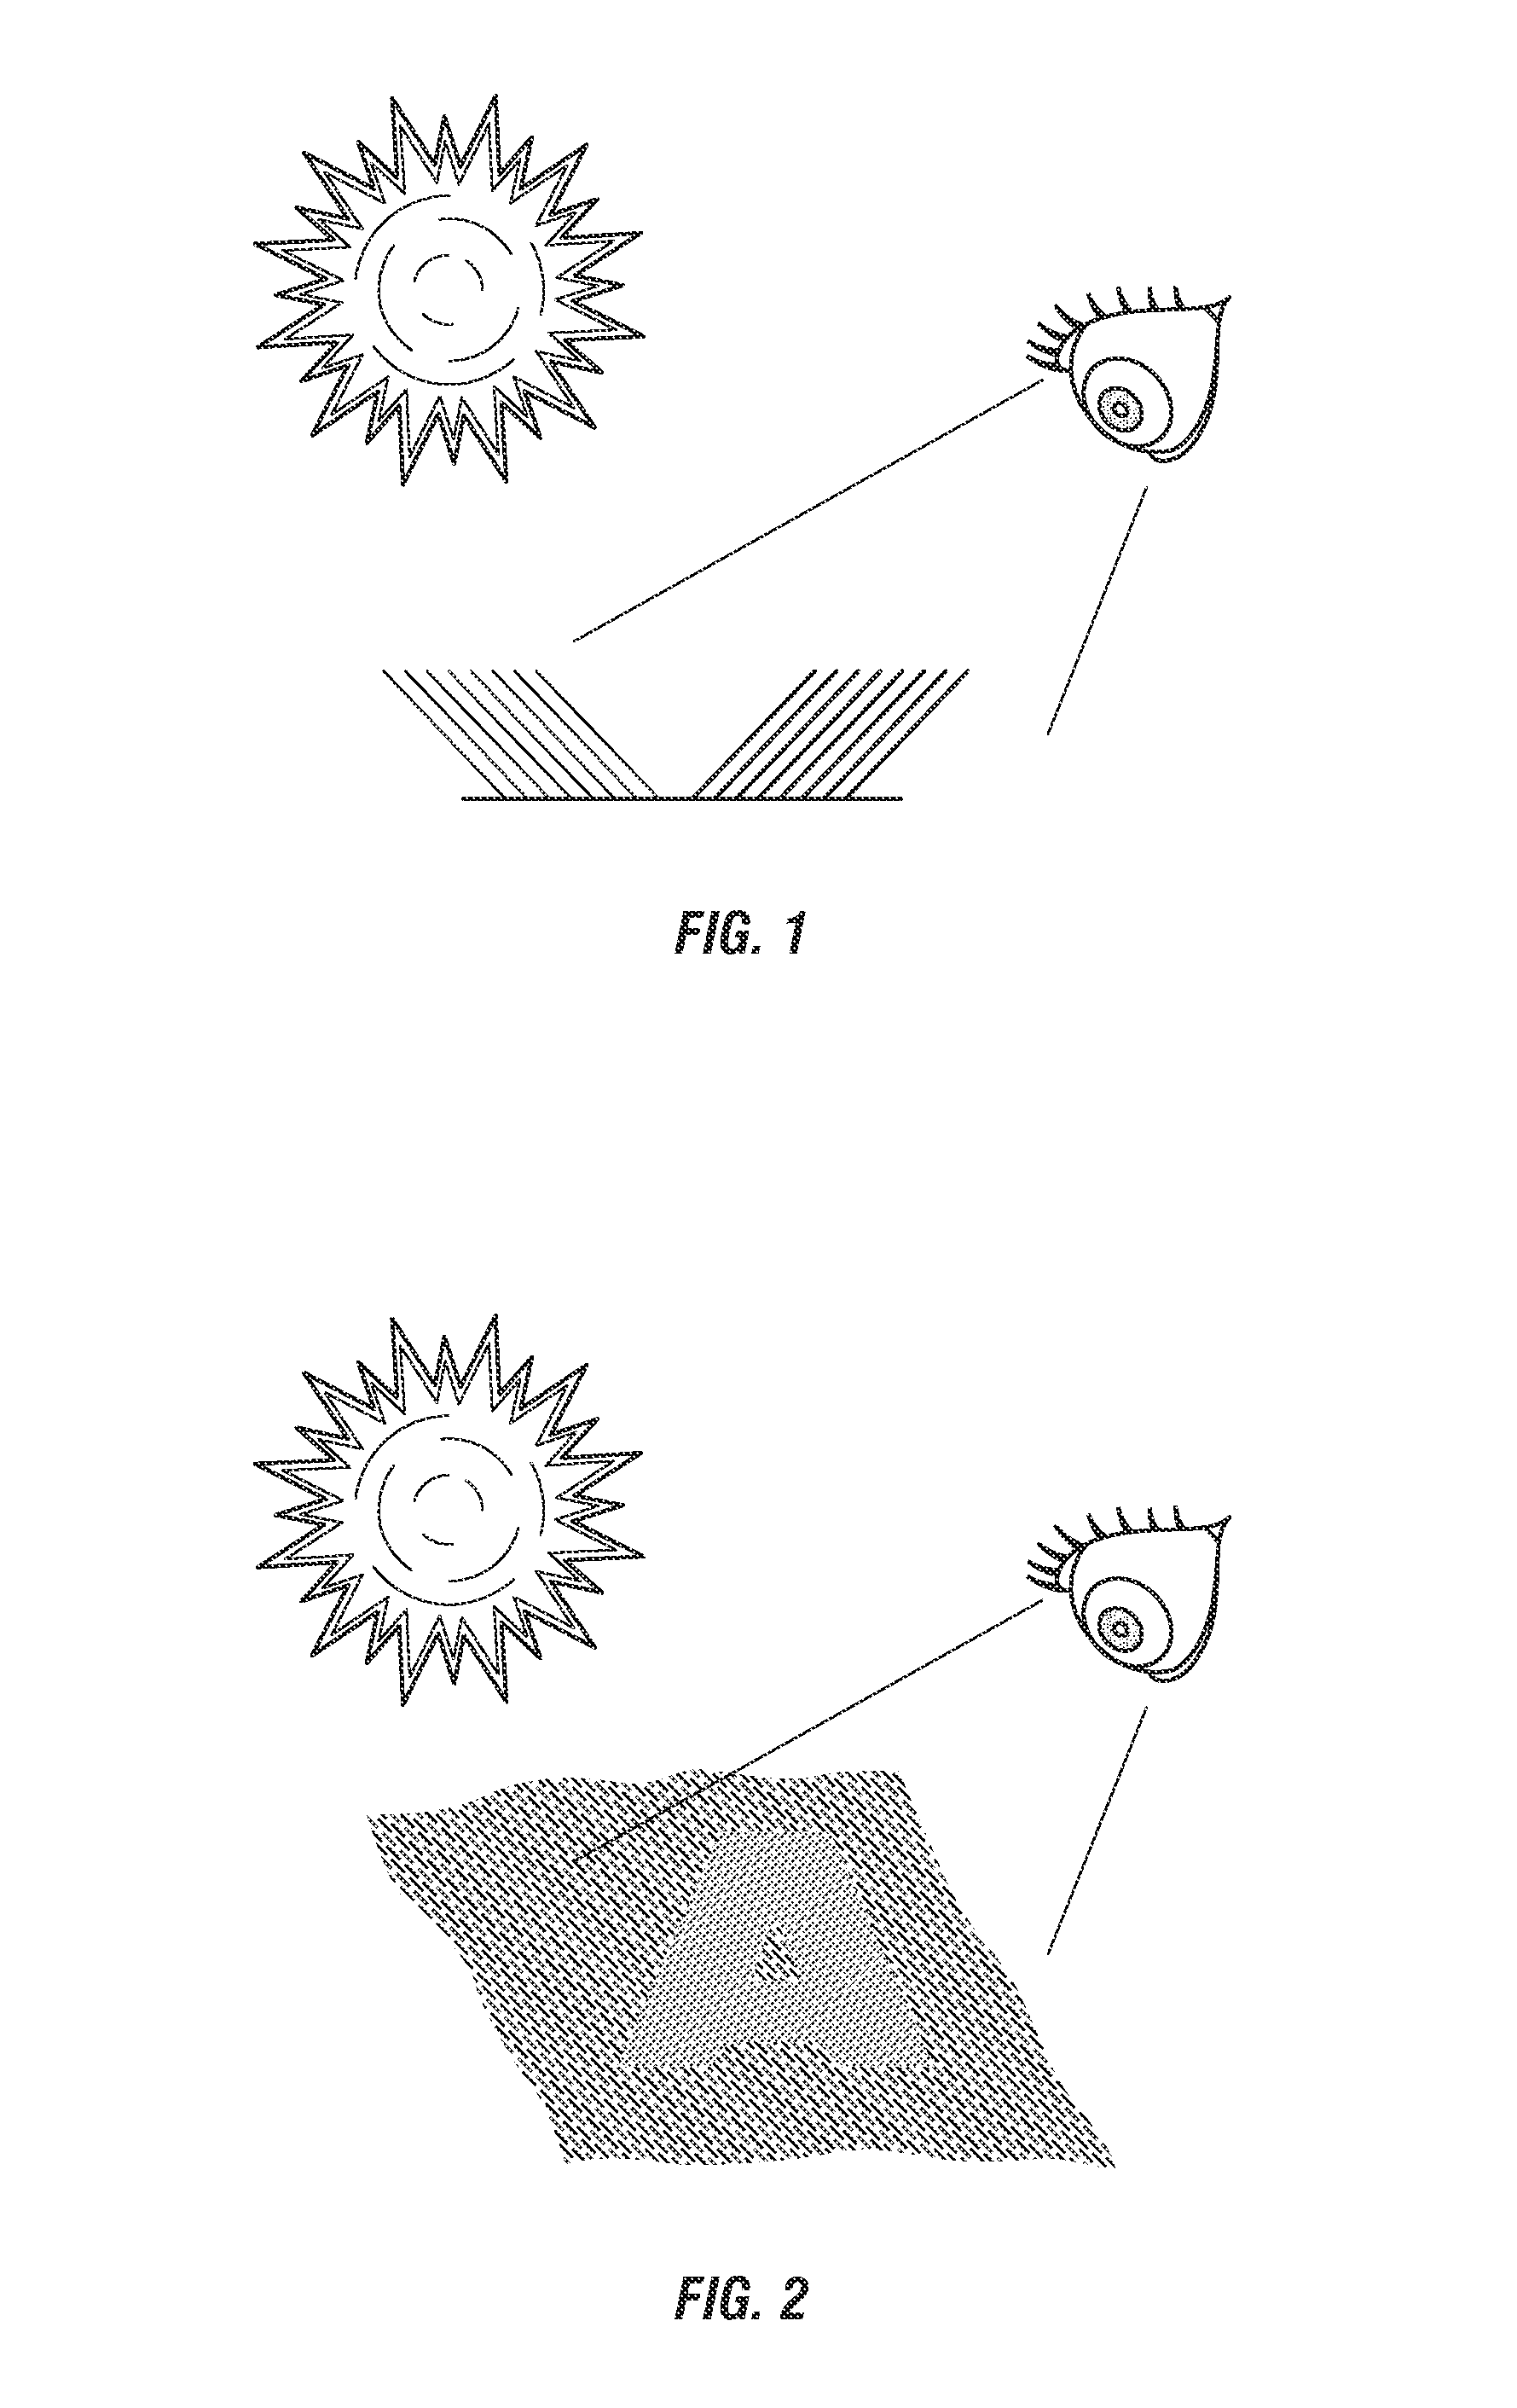 Method and apparatus for creating visual effects on grass